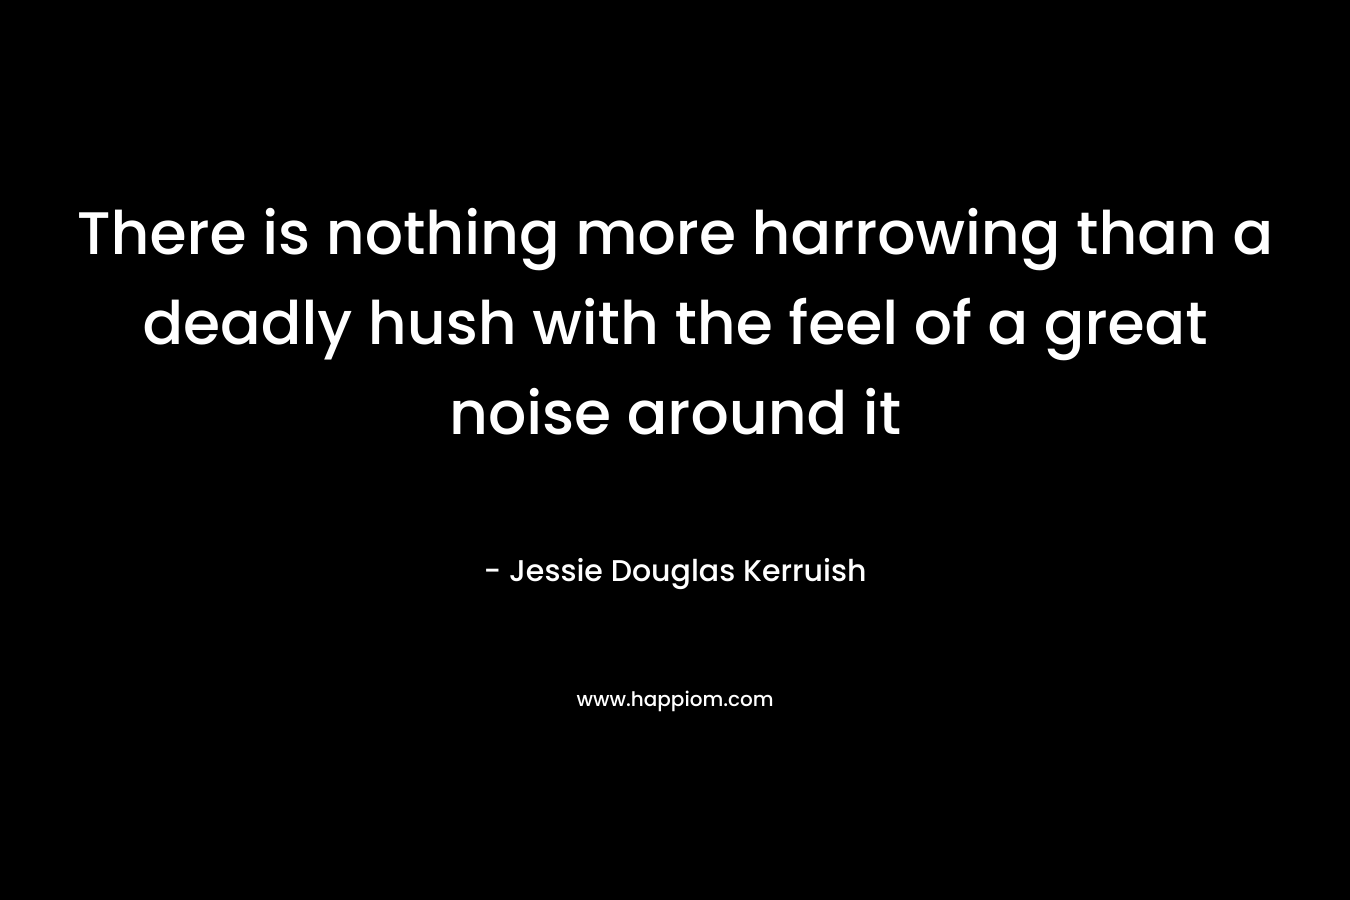 There is nothing more harrowing than a deadly hush with the feel of a great noise around it